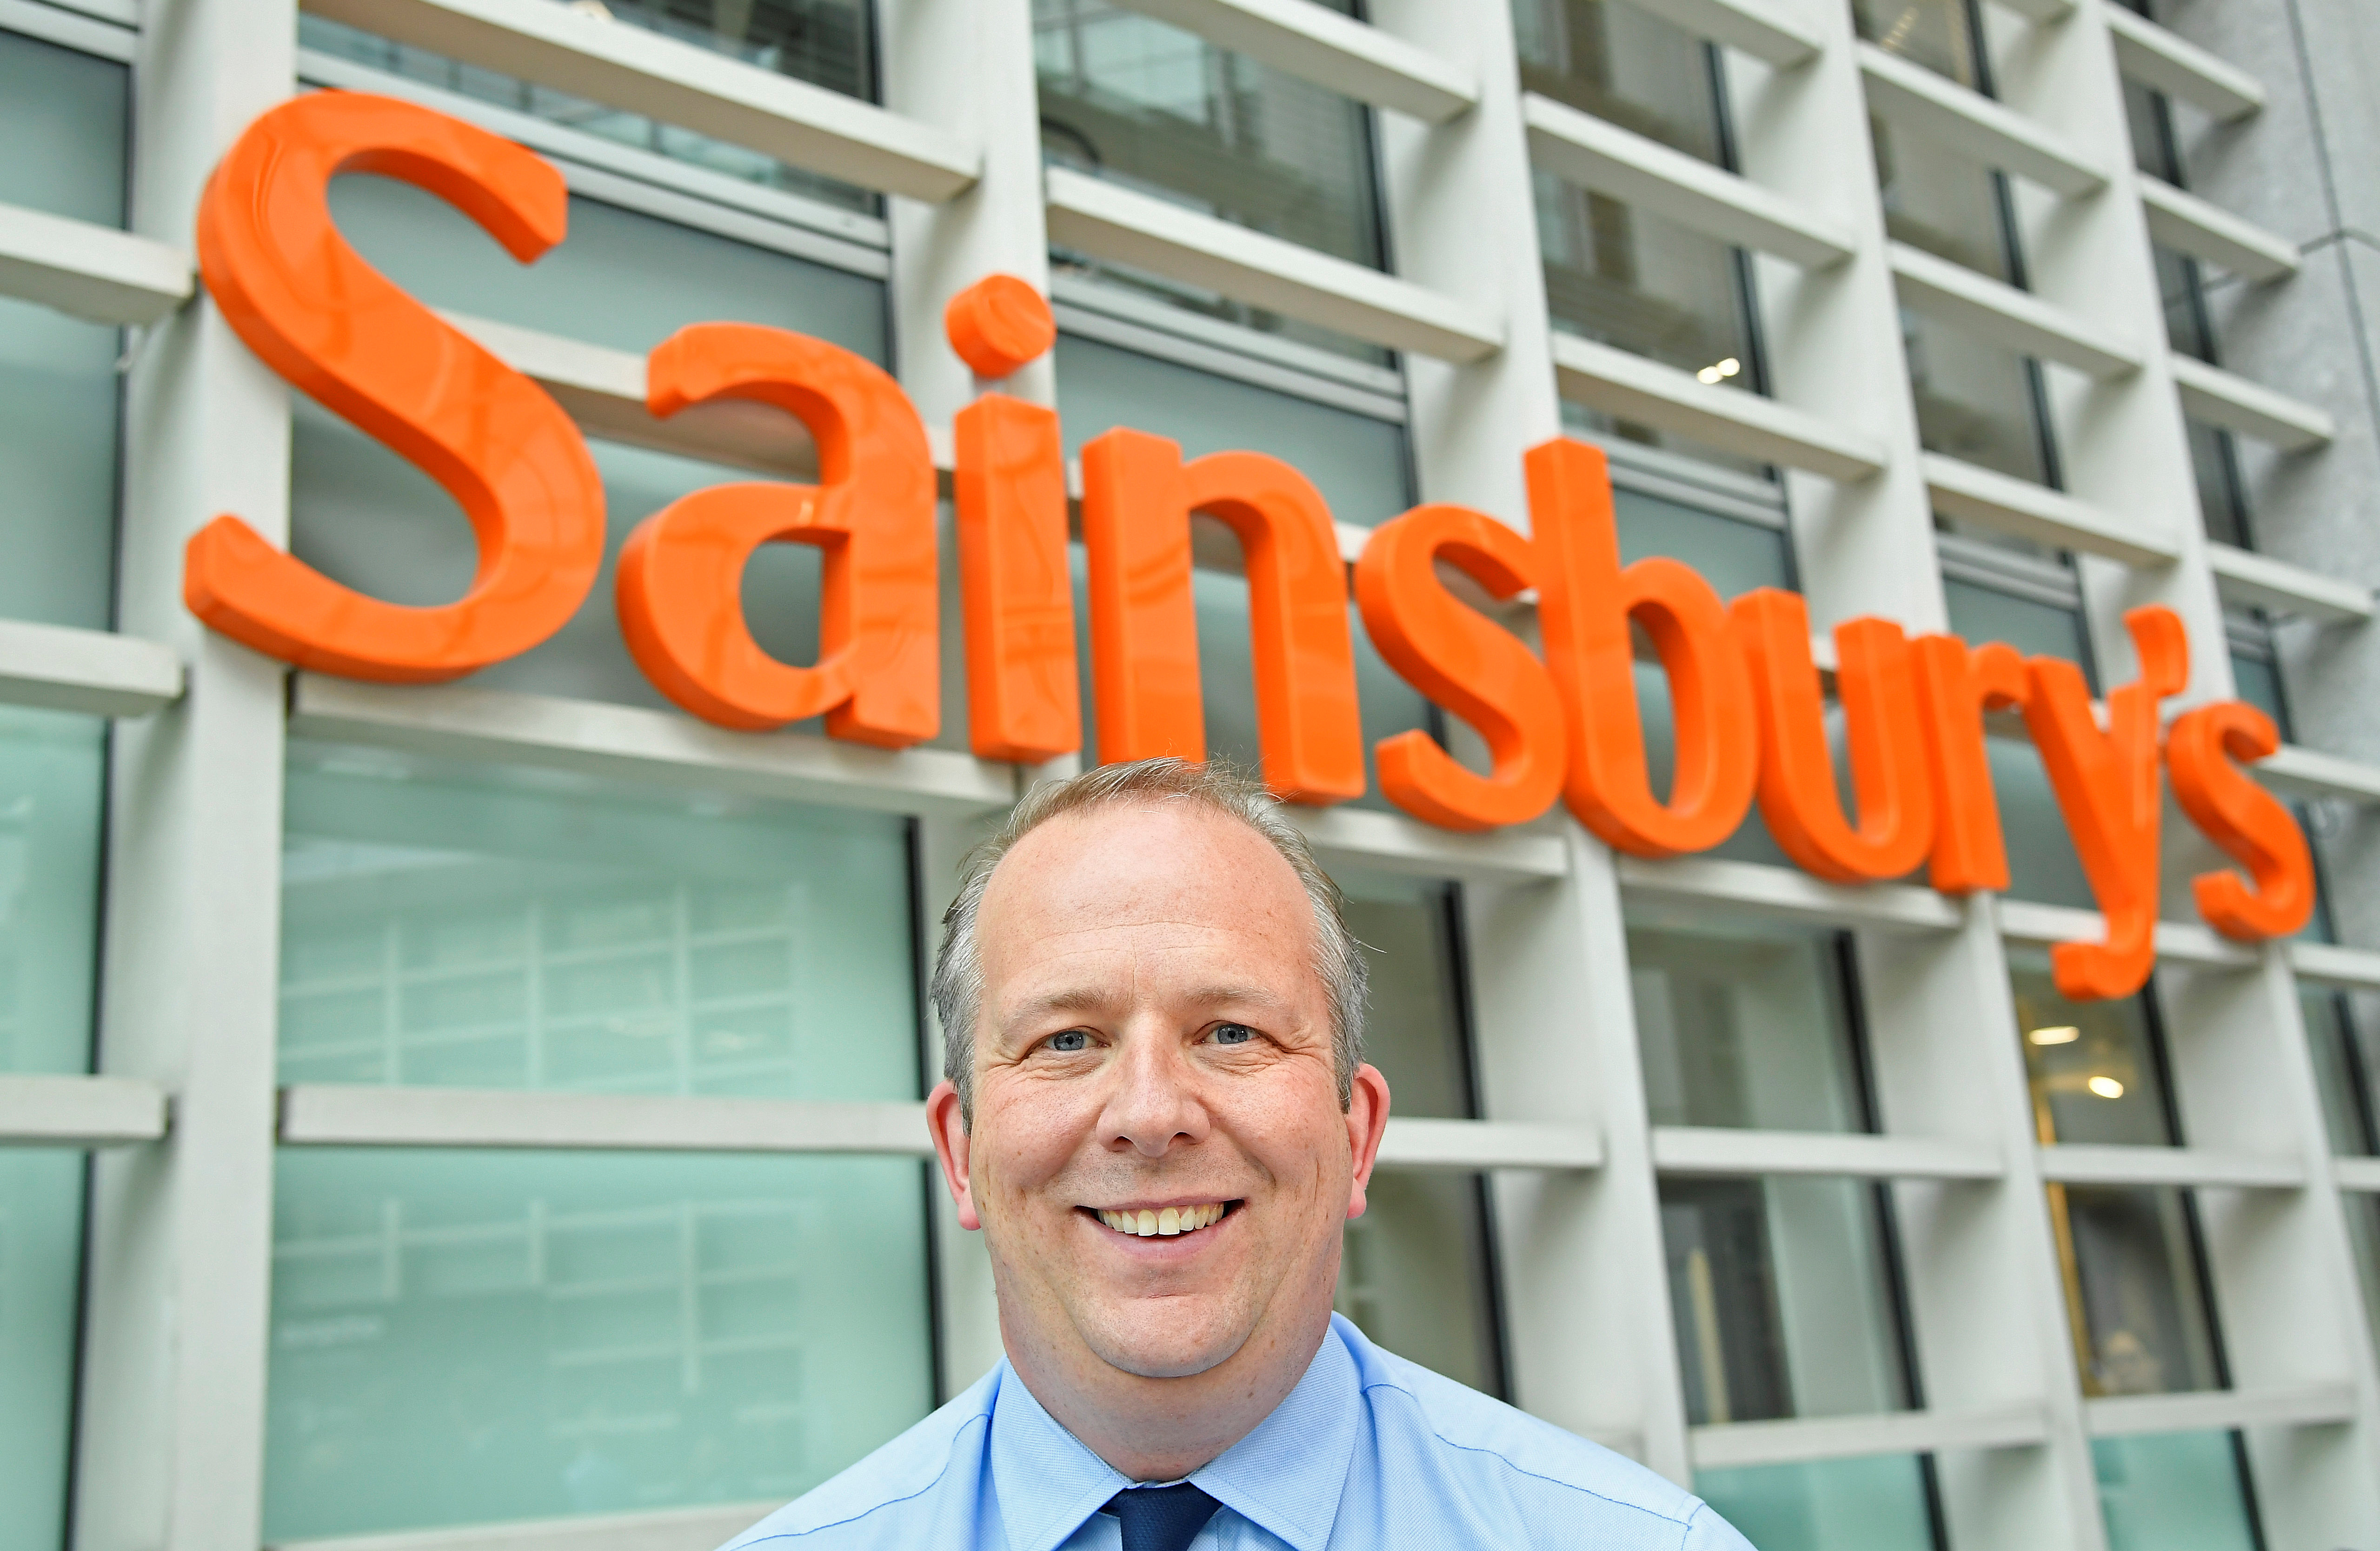 Roberts, Retail and Operations Director of Sainsbury's, poses for a portrait at the company headquarters in London